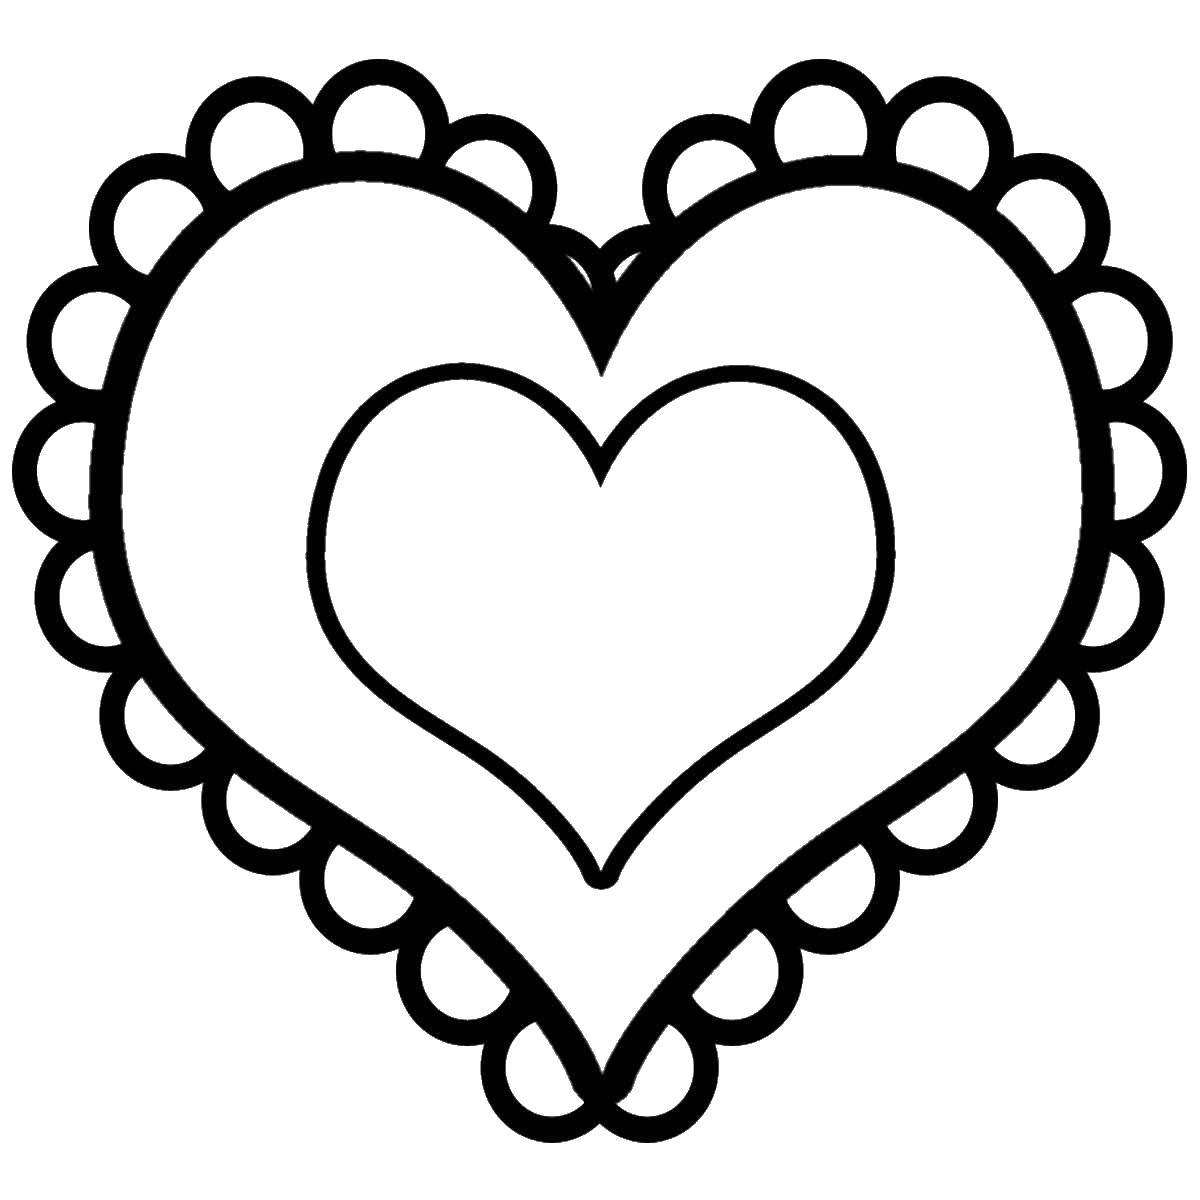 Coloring Lace heart. Category Valentines day. Tags:  Valentines day, love, heart.